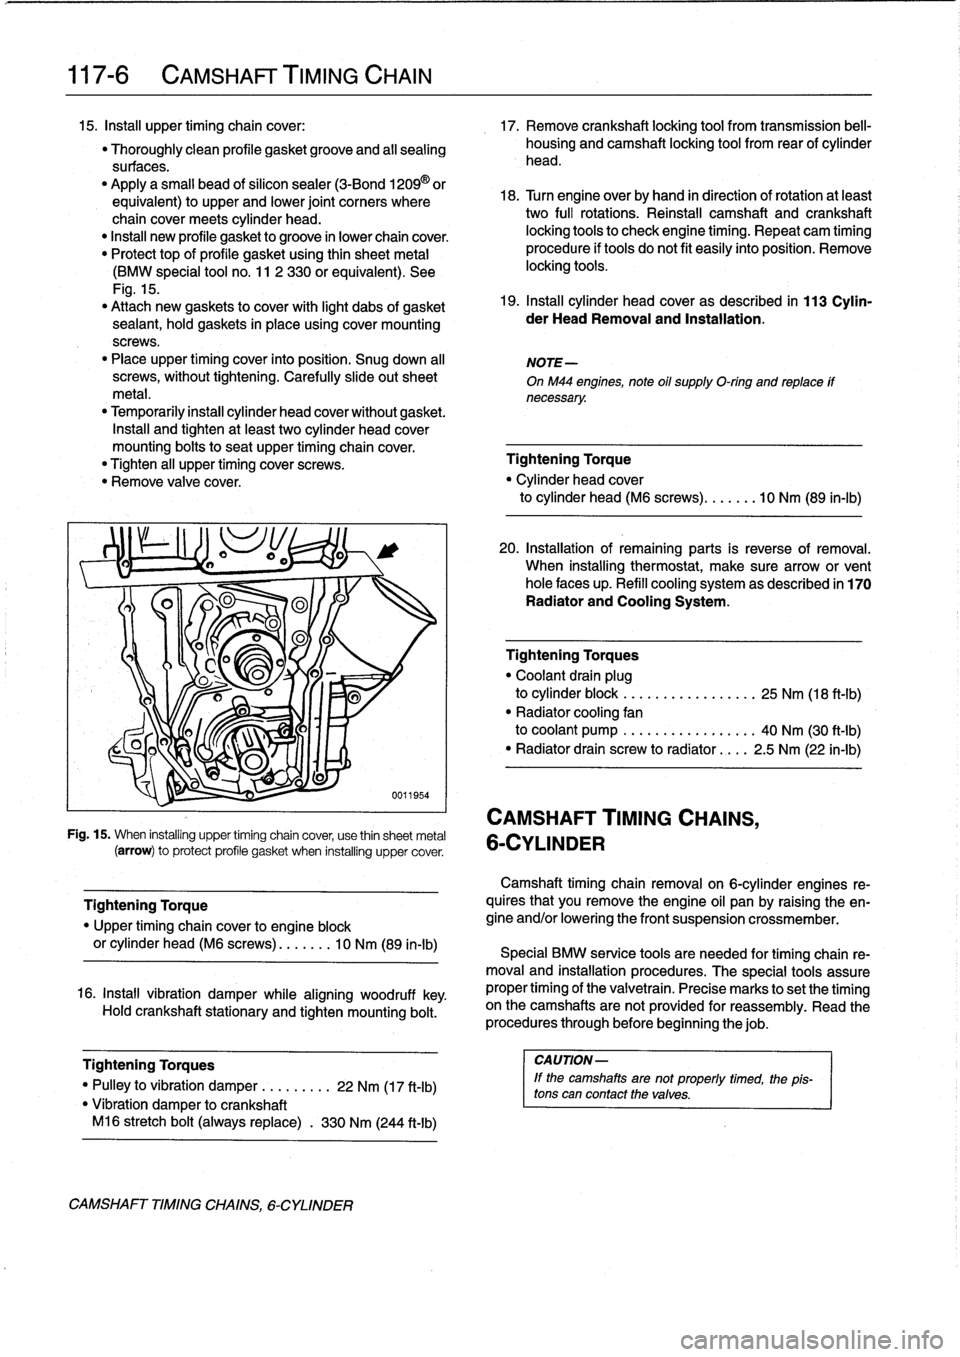 BMW 328i 1995 E36 Workshop Manual 
117-
6

	

CAMSHAFT
TIMING
CHAIN

15
.
Insta¡¡
upper
timing
chaincover
:

	

17
.
Remove
crankshaft
locking
tool
from
transmission
bell-

"
Thoroughly
clean
profile
gasketgroove
and
all
sealing

	
